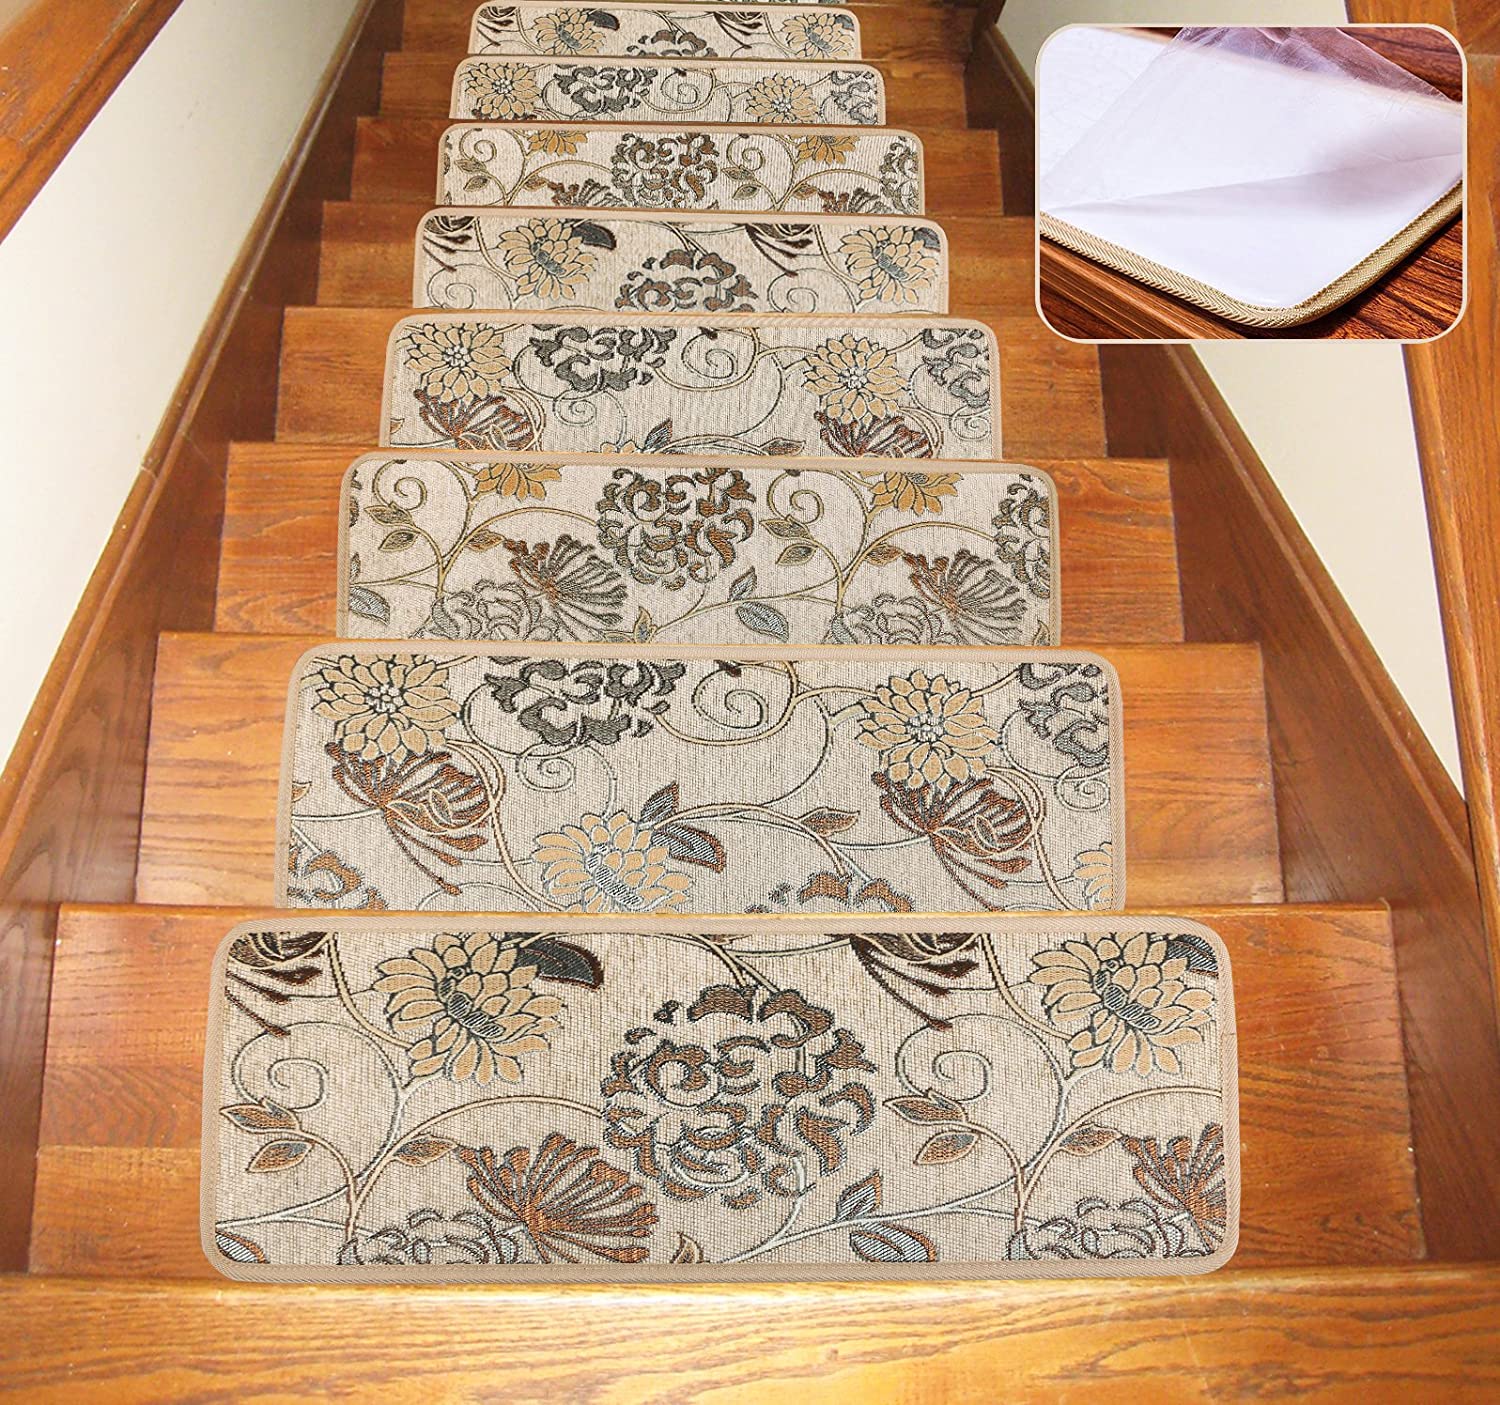 Seloom Washable Non-Slip Stair Treads Carpet with Skid Resistant Rubber Backing Specialized for Indoor Wooden Steps (30x9.5 Inch+24x36 Inch, 14Pieces, Beige（Flower）)